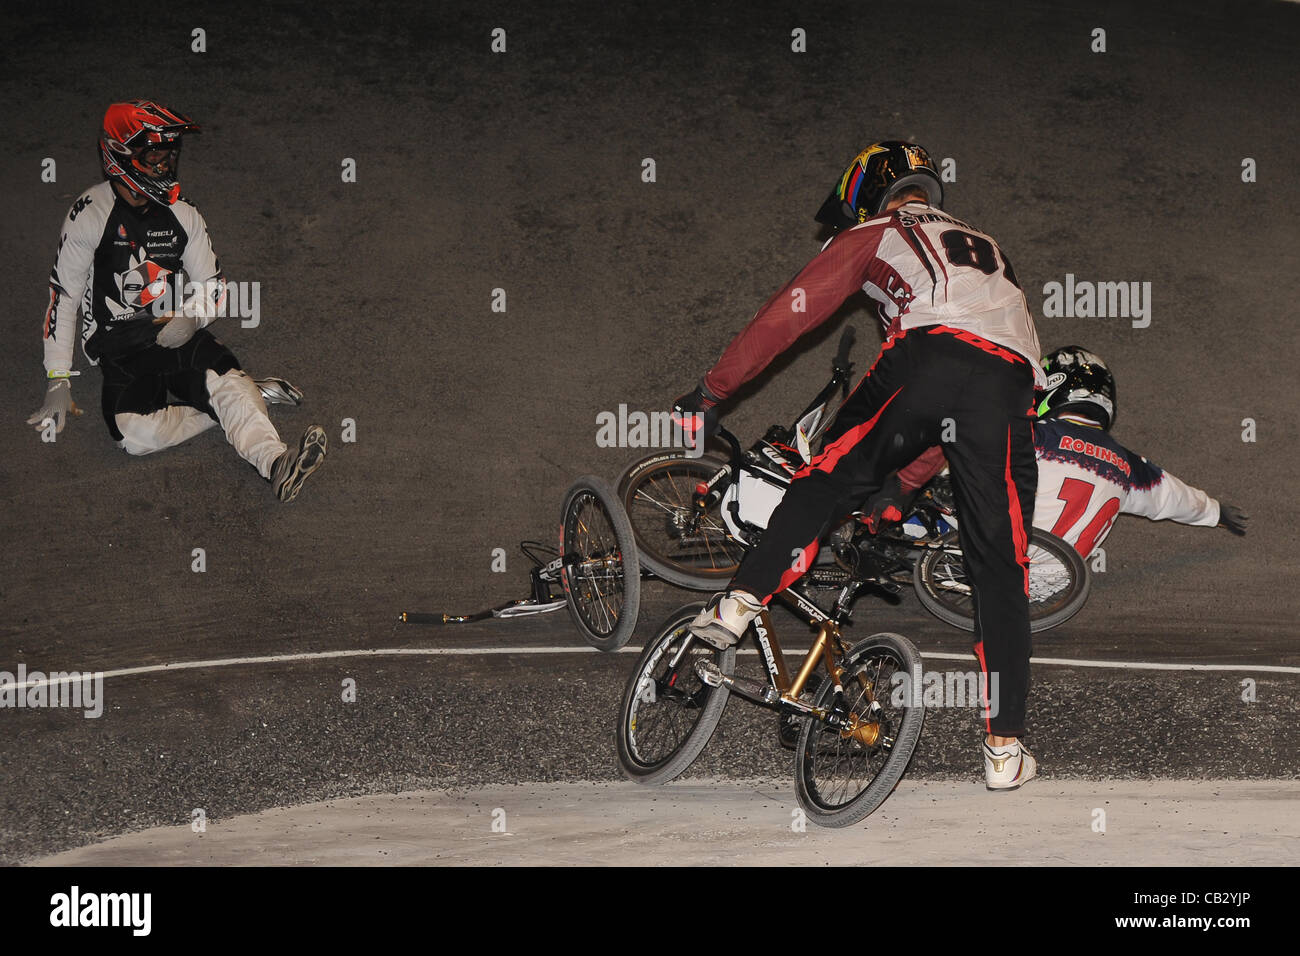 26.05.2012.  England, Birmingham, National Indoor Arena. UCI BMX World Championships. WILLERS Marc (New Zealand) crashes  along with David HERMAN, Donny ROBINSON and  Maris STROMBERGS during the Mens Elite Final. Stock Photo